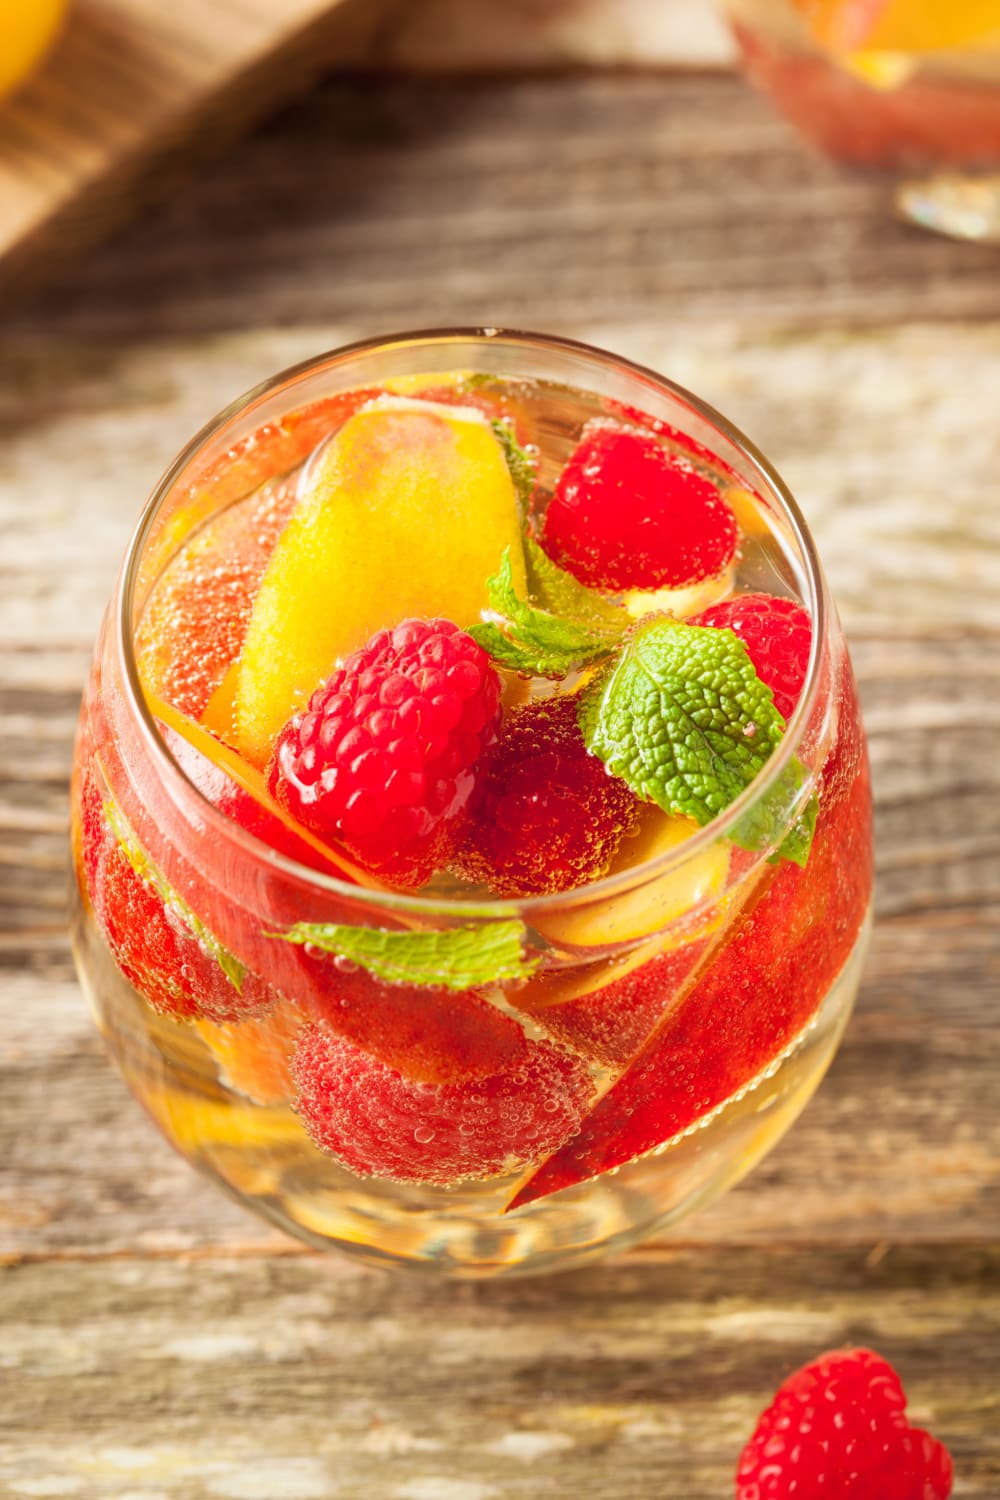 A Glass of White Sangria with Fruits